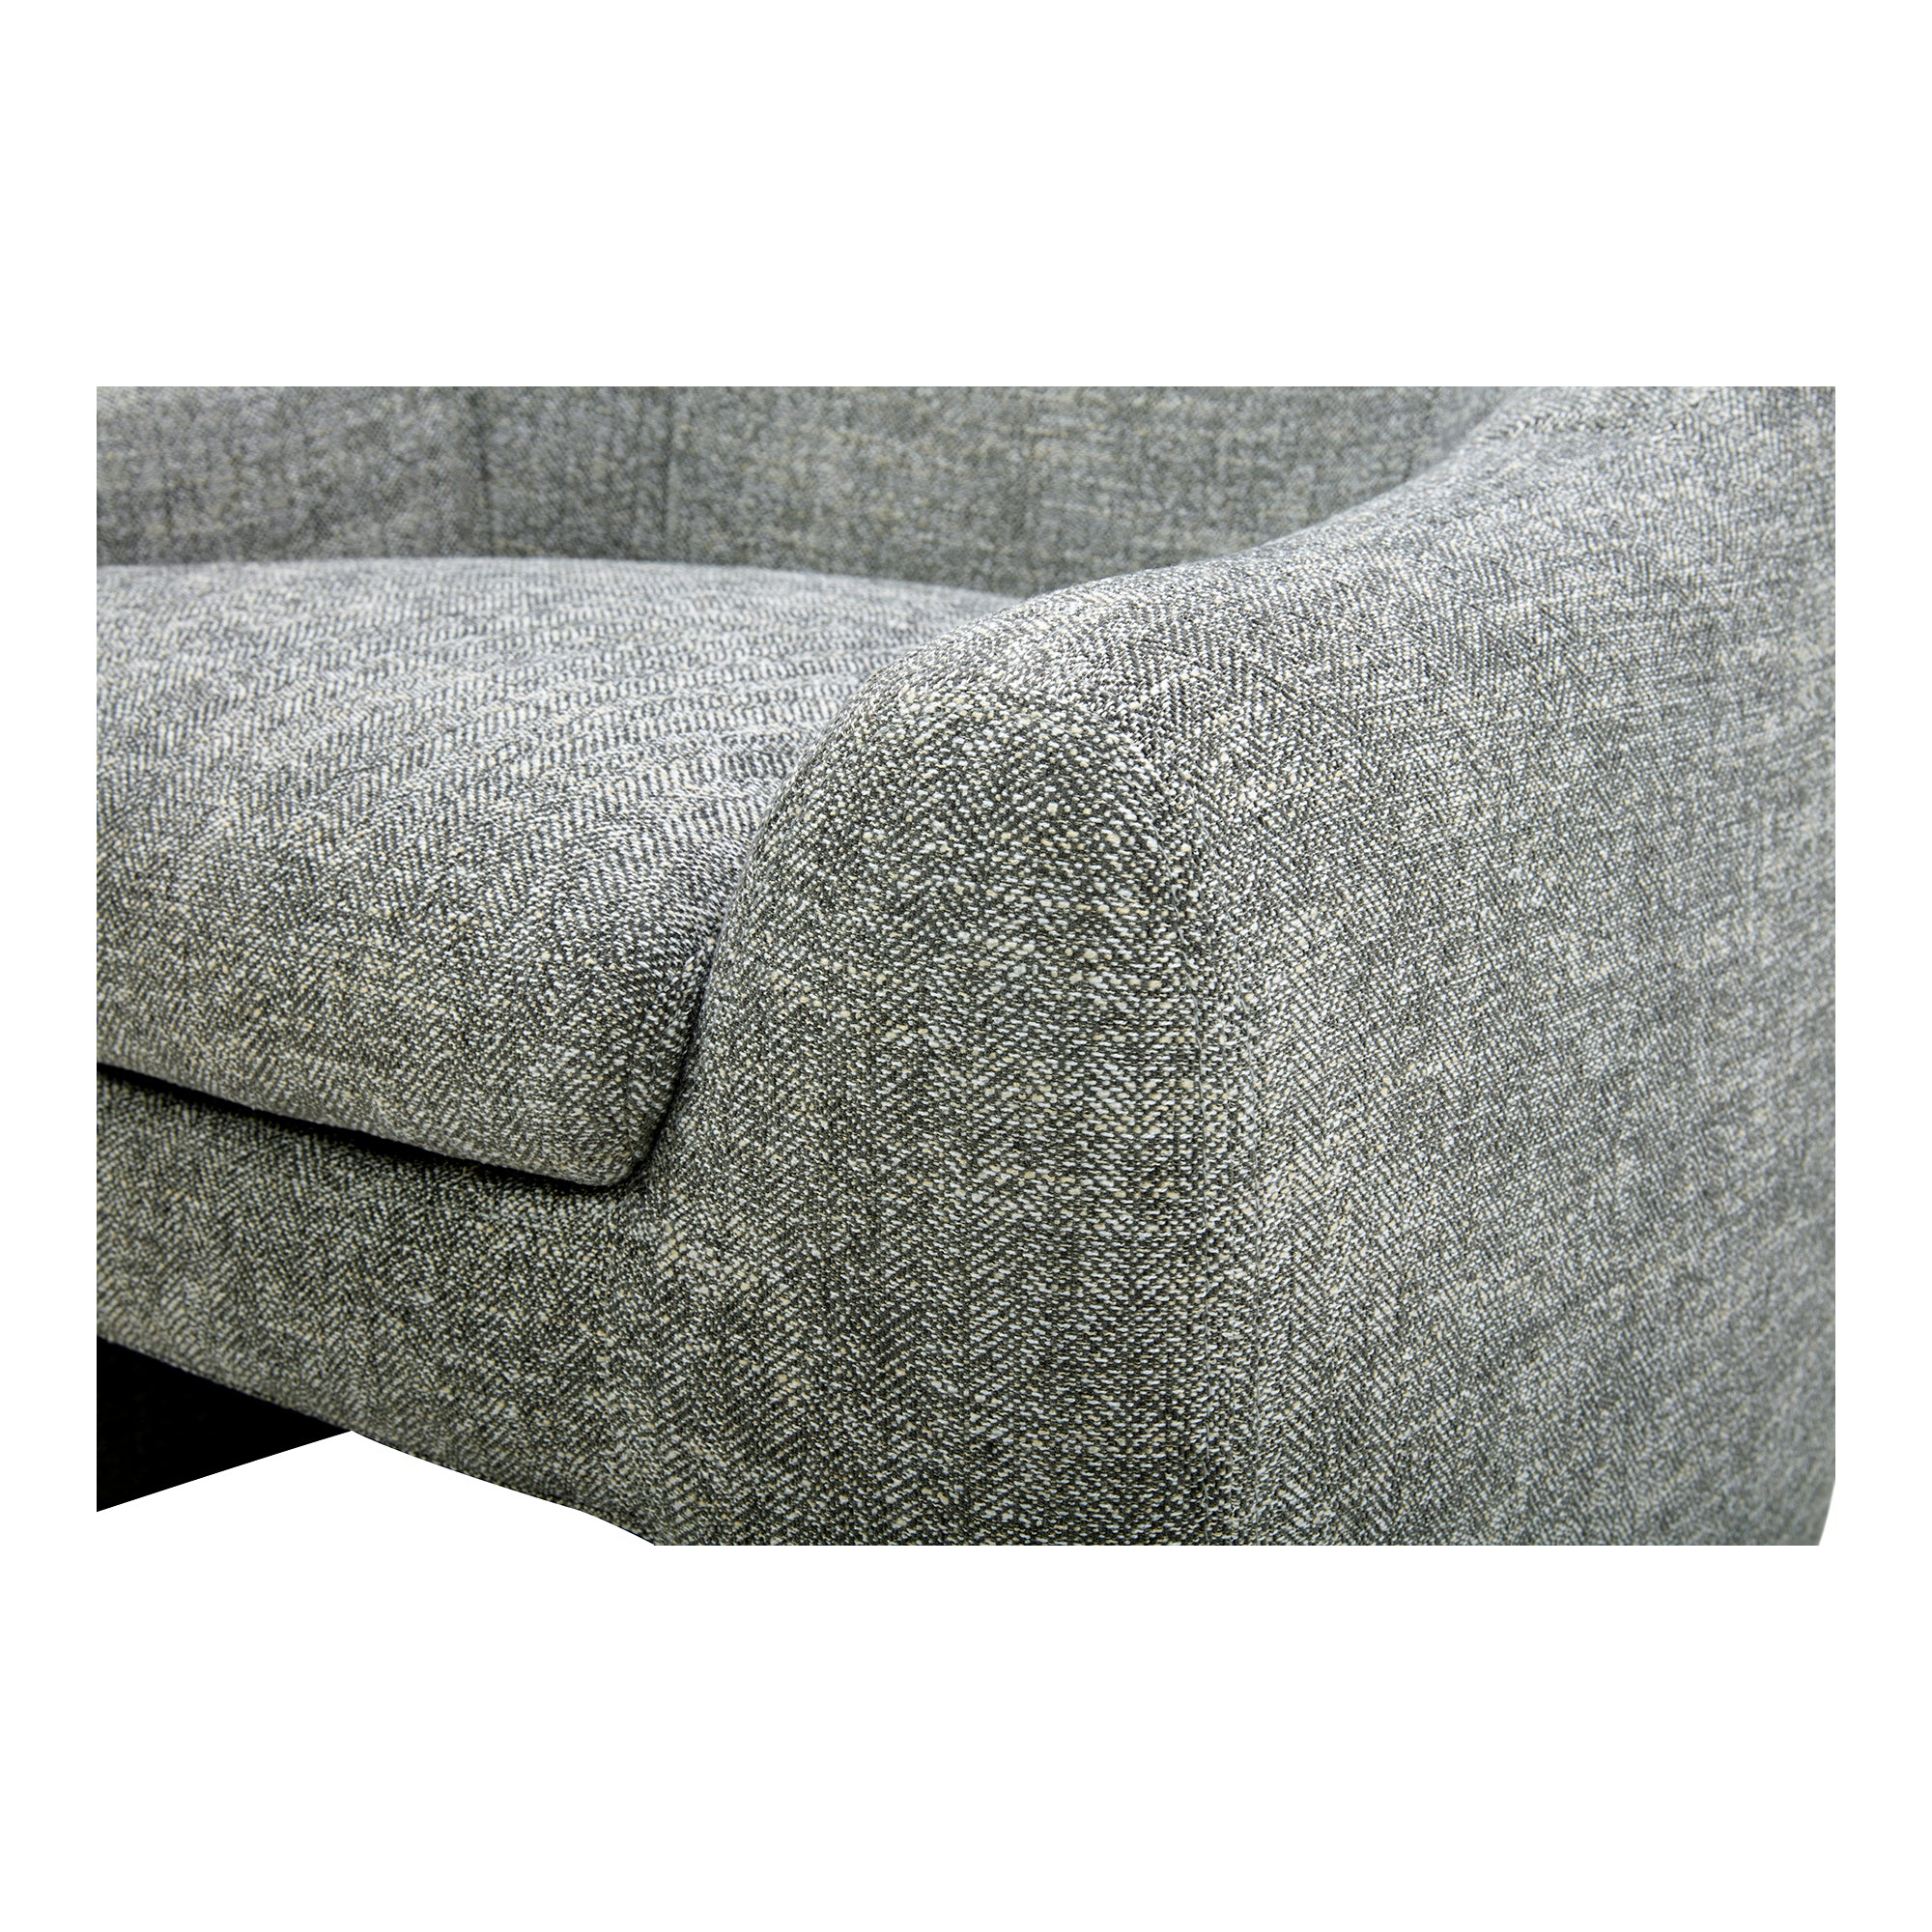 Kenzie Accent Chair Slated Moss